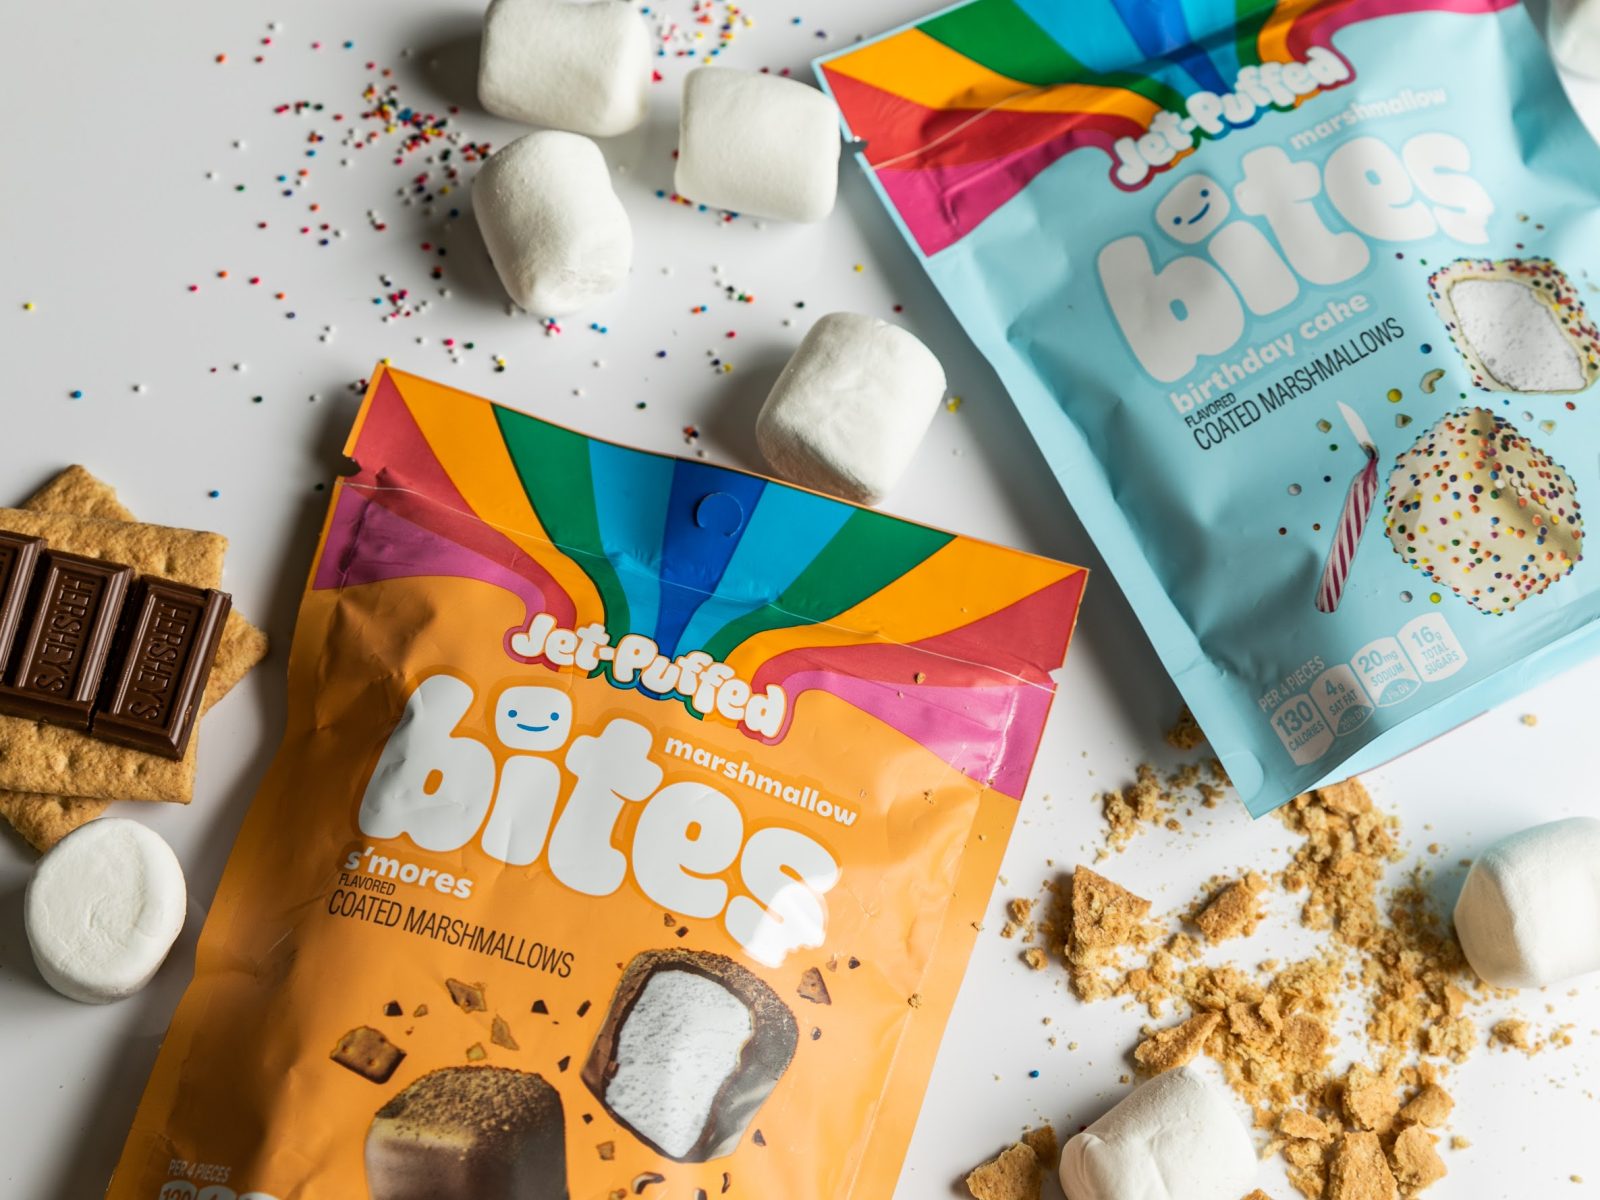 Find Two Varieties Of Tasty Jet-Puffed Marshmallow Bites At Publix